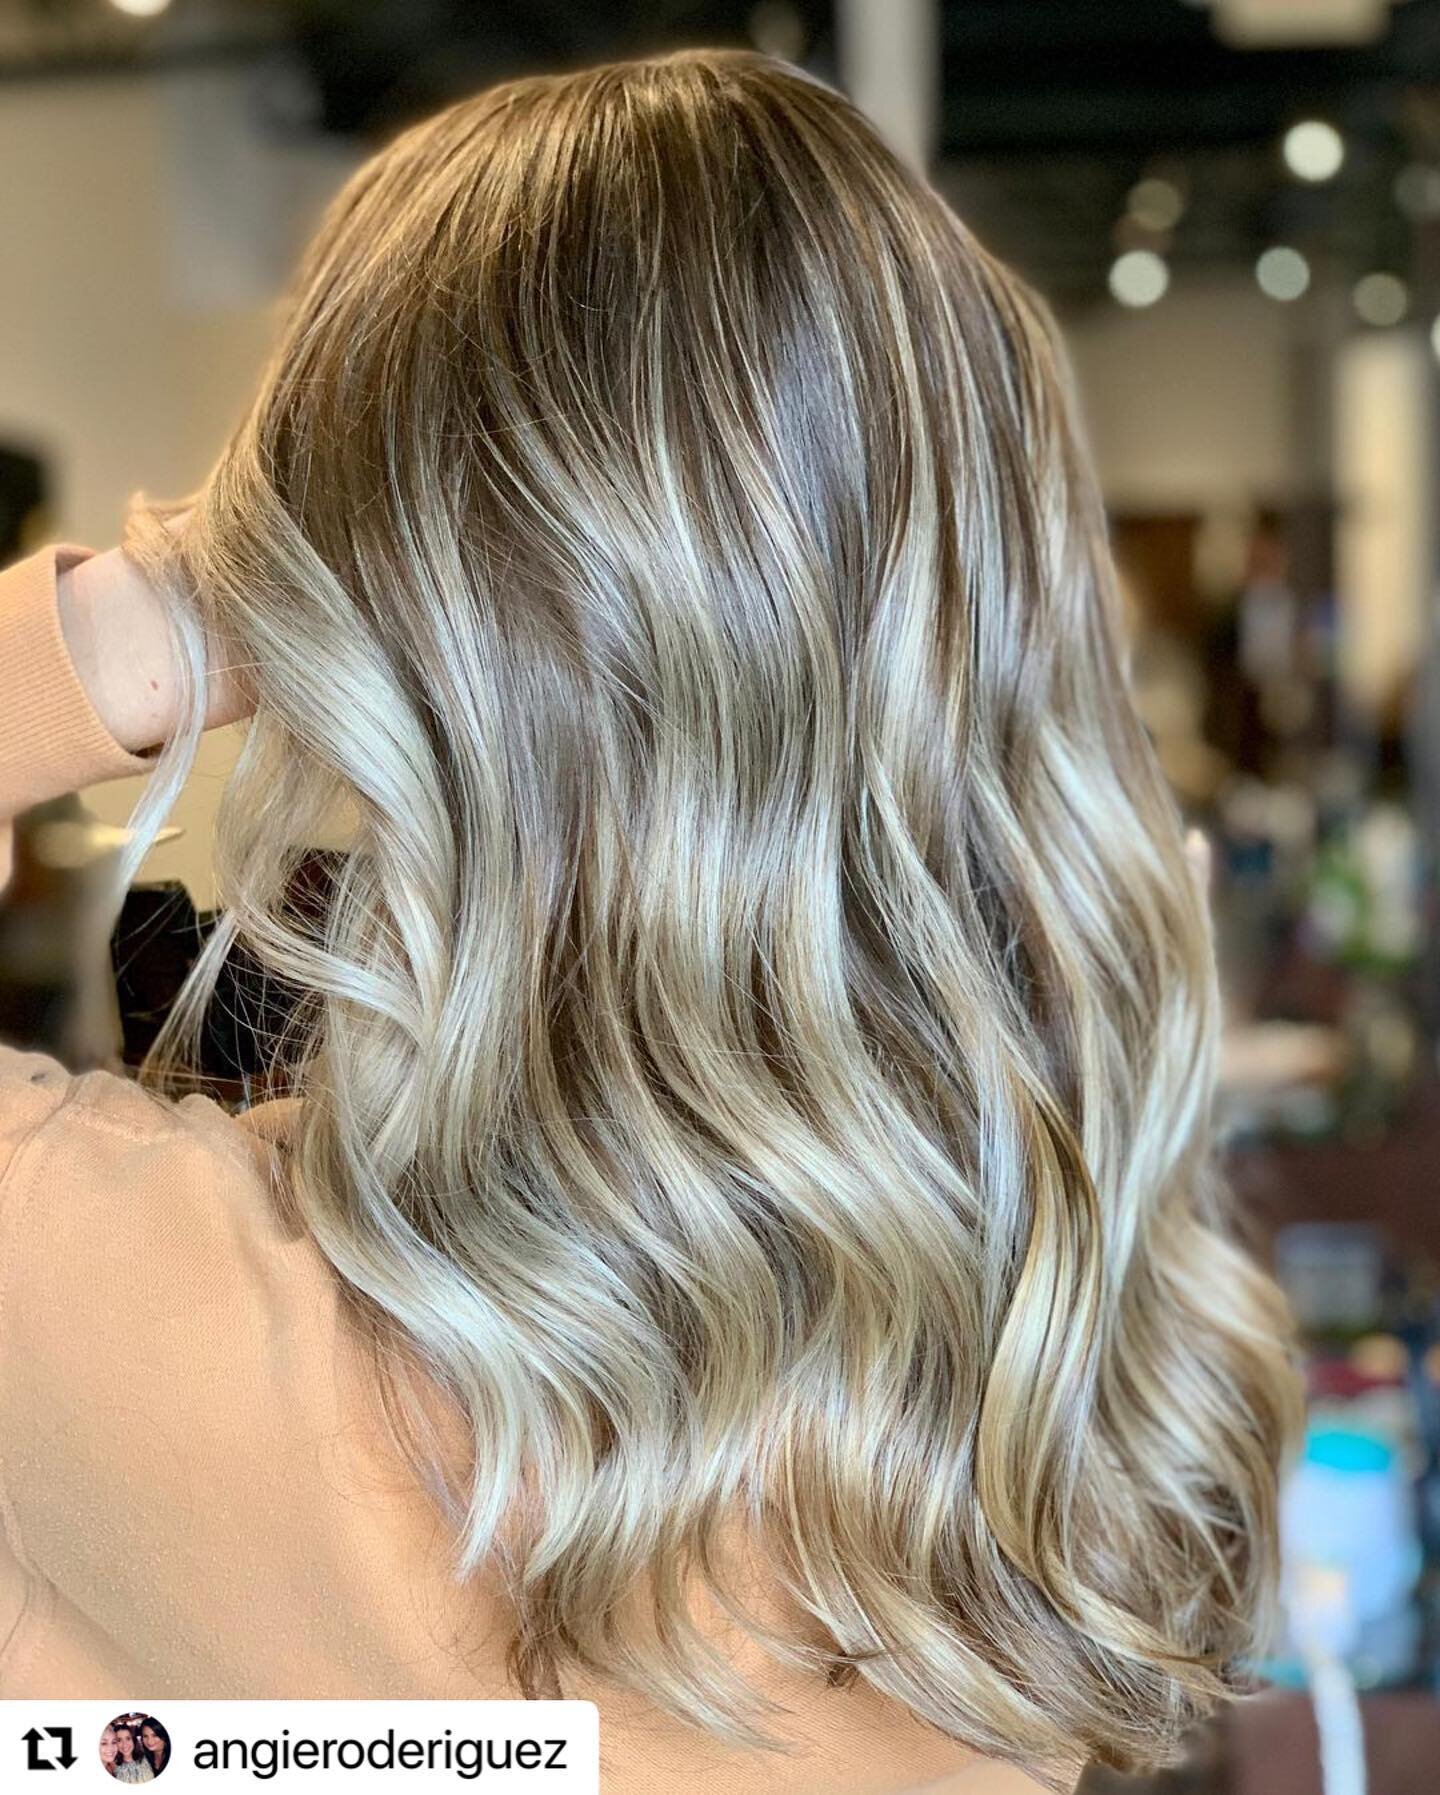 They say blondes have more fun &hellip;&hellip;&hellip;

#blonde #blondehair #blondebalayage #blonds #blondehighlights #blondehairstyles #goldwellcolor #oribe #morrocanoil #amikapro #unitehair #behindthechair #behindthechairstylist #collegeville #col